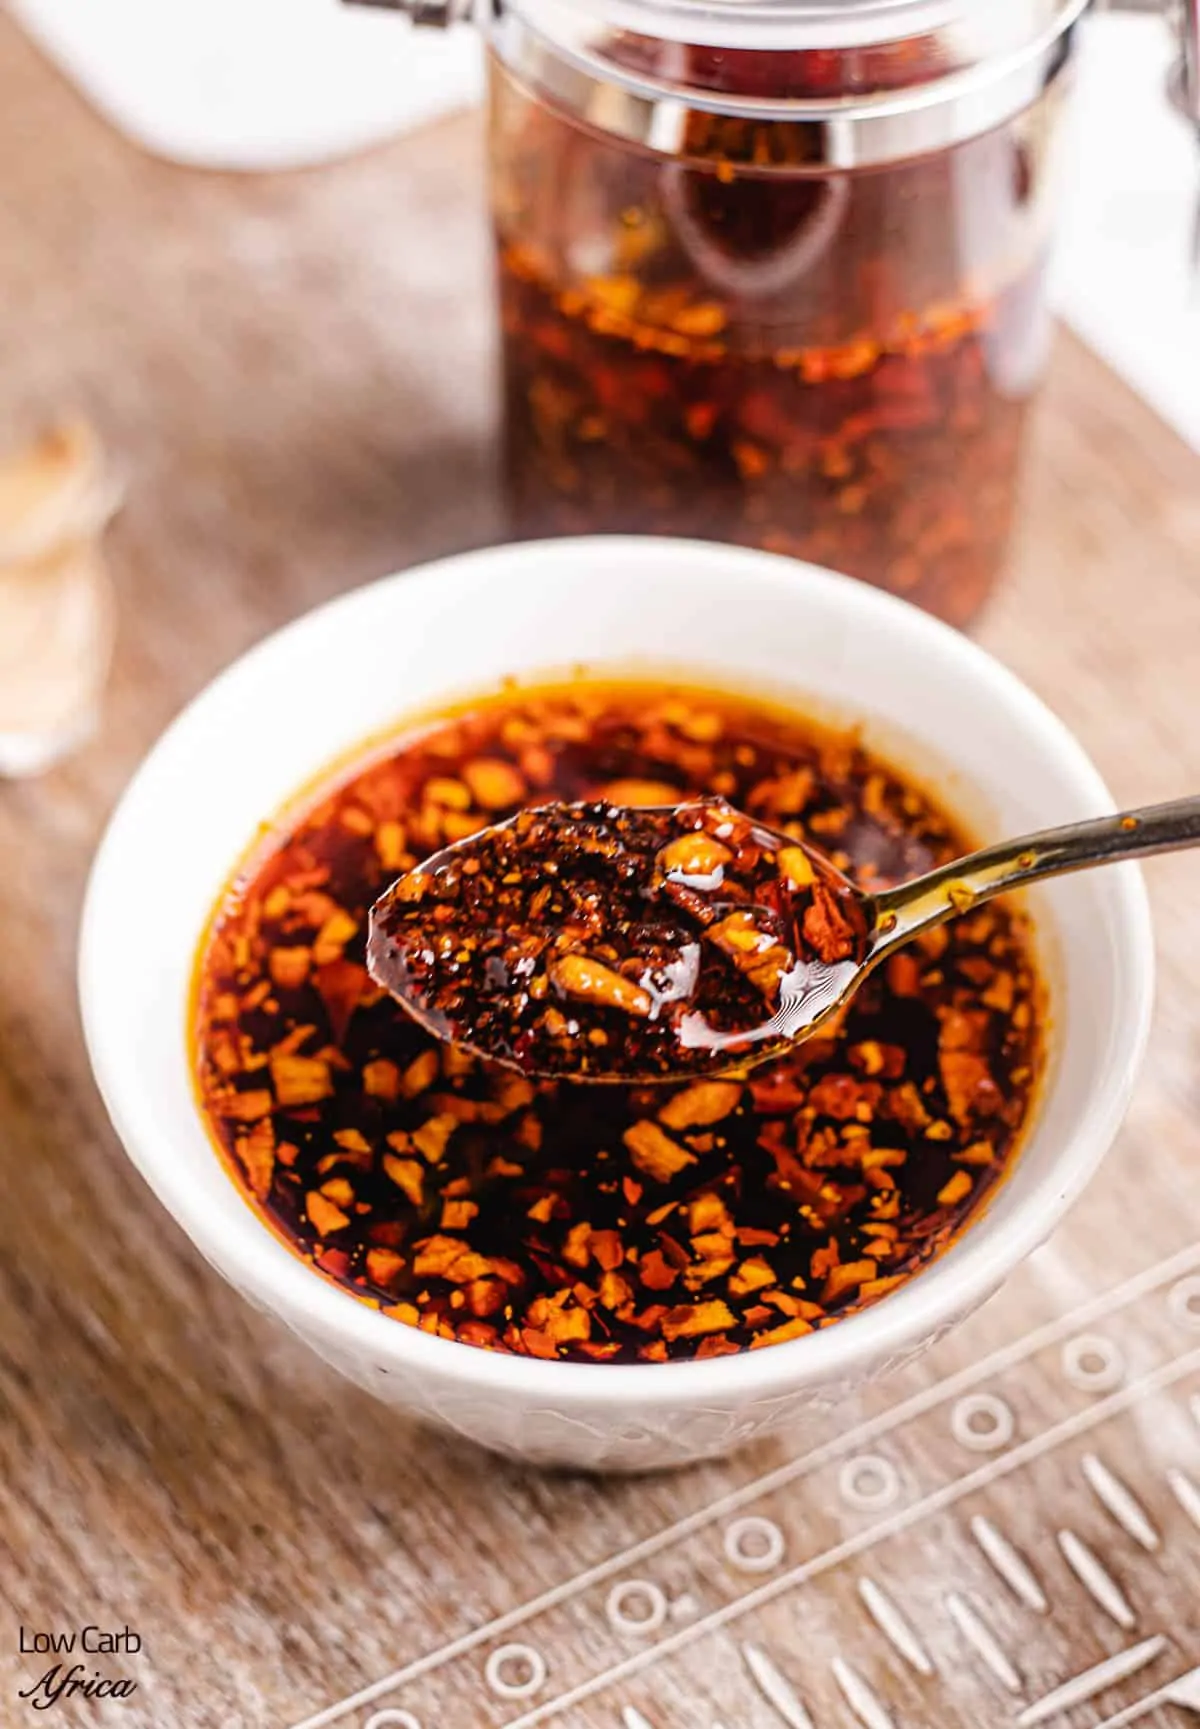 A spoon to scoop the garlic chili oil.